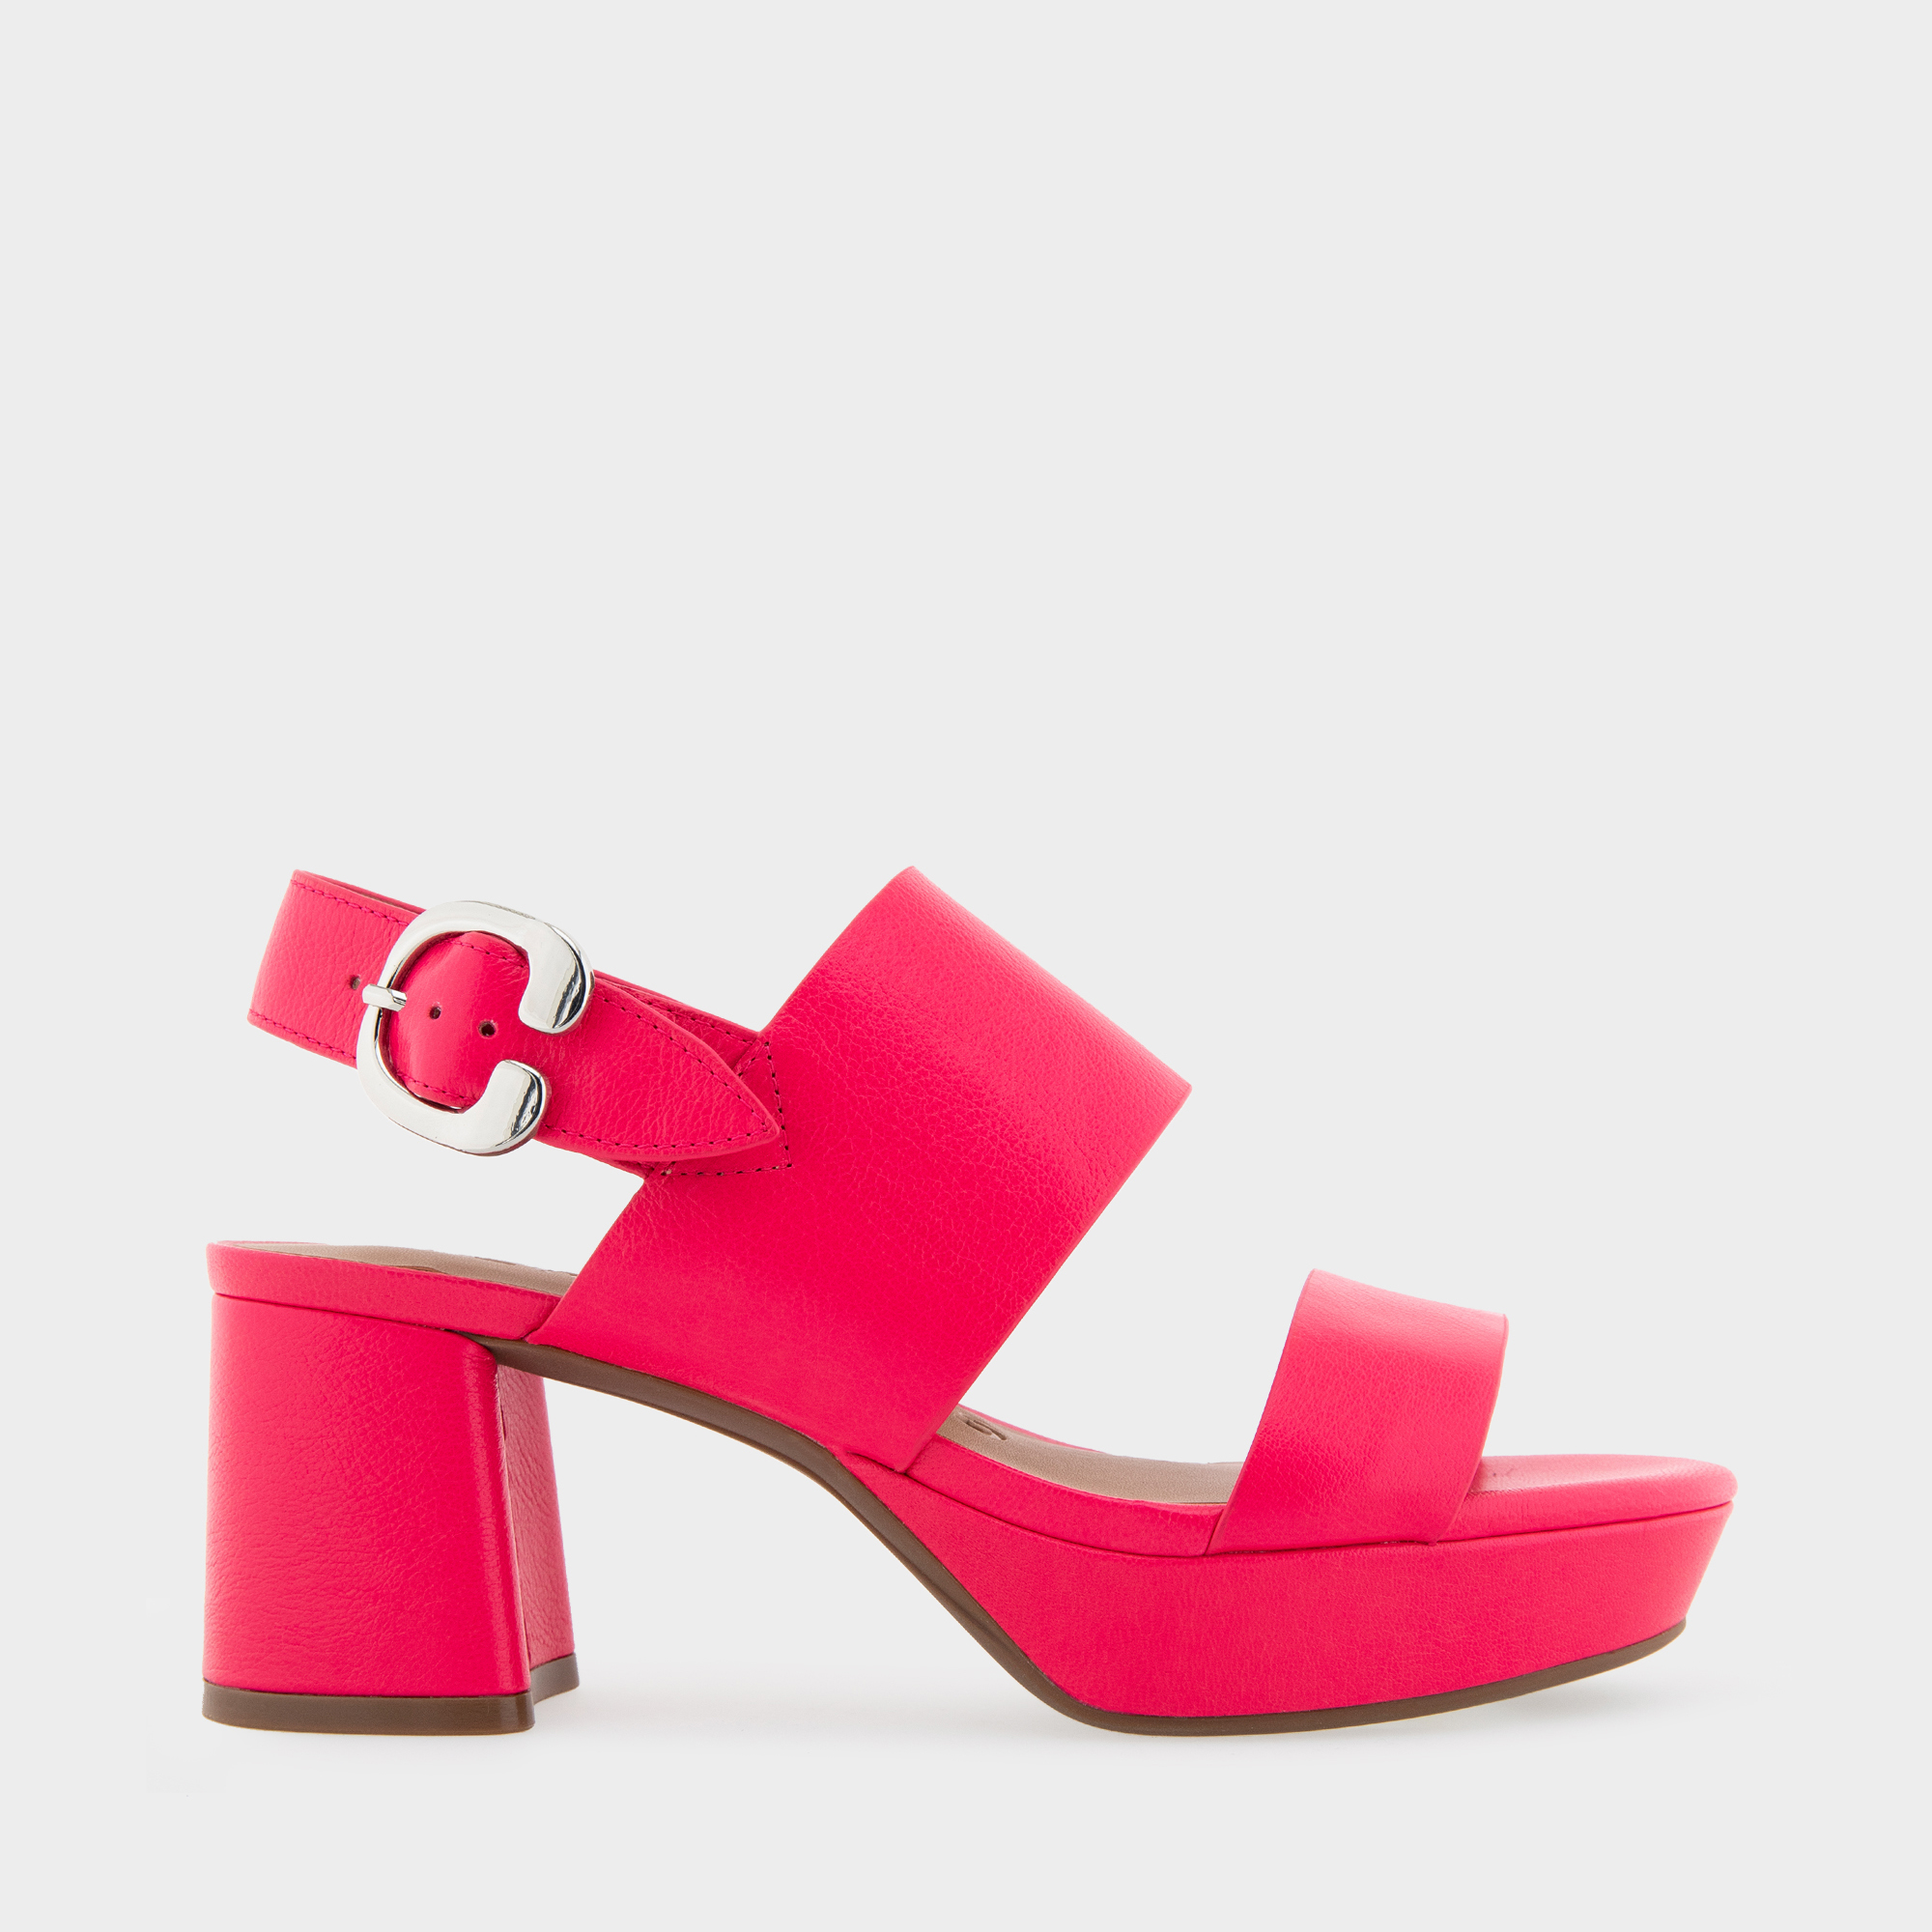 Camera Sandal in Virtual Pink Leather